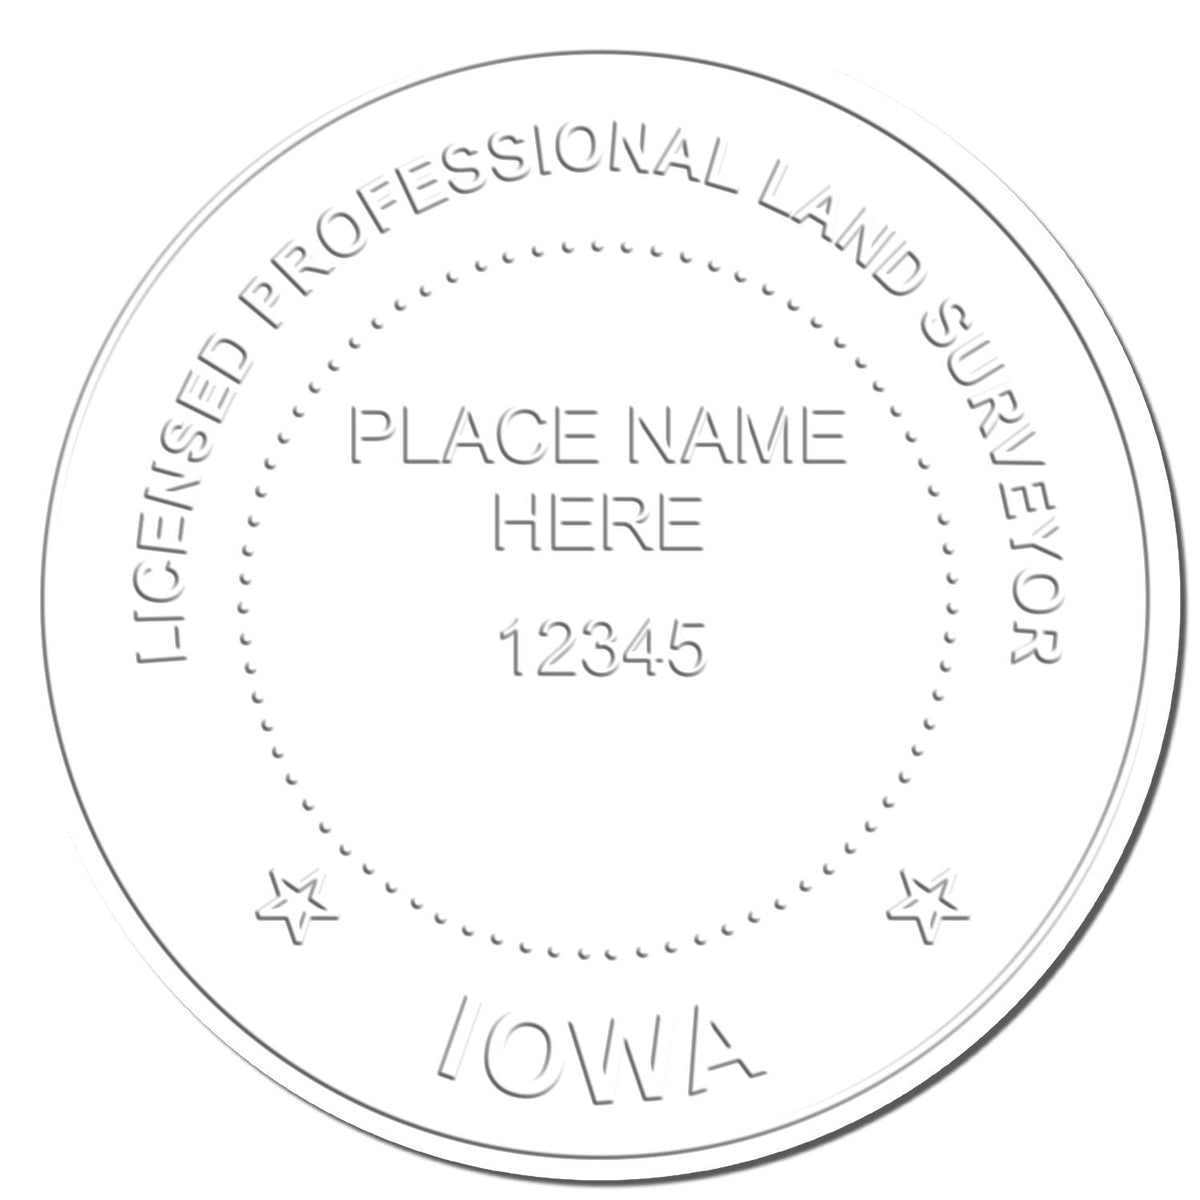 This paper is stamped with a sample imprint of the Handheld Iowa Land Surveyor Seal, signifying its quality and reliability.